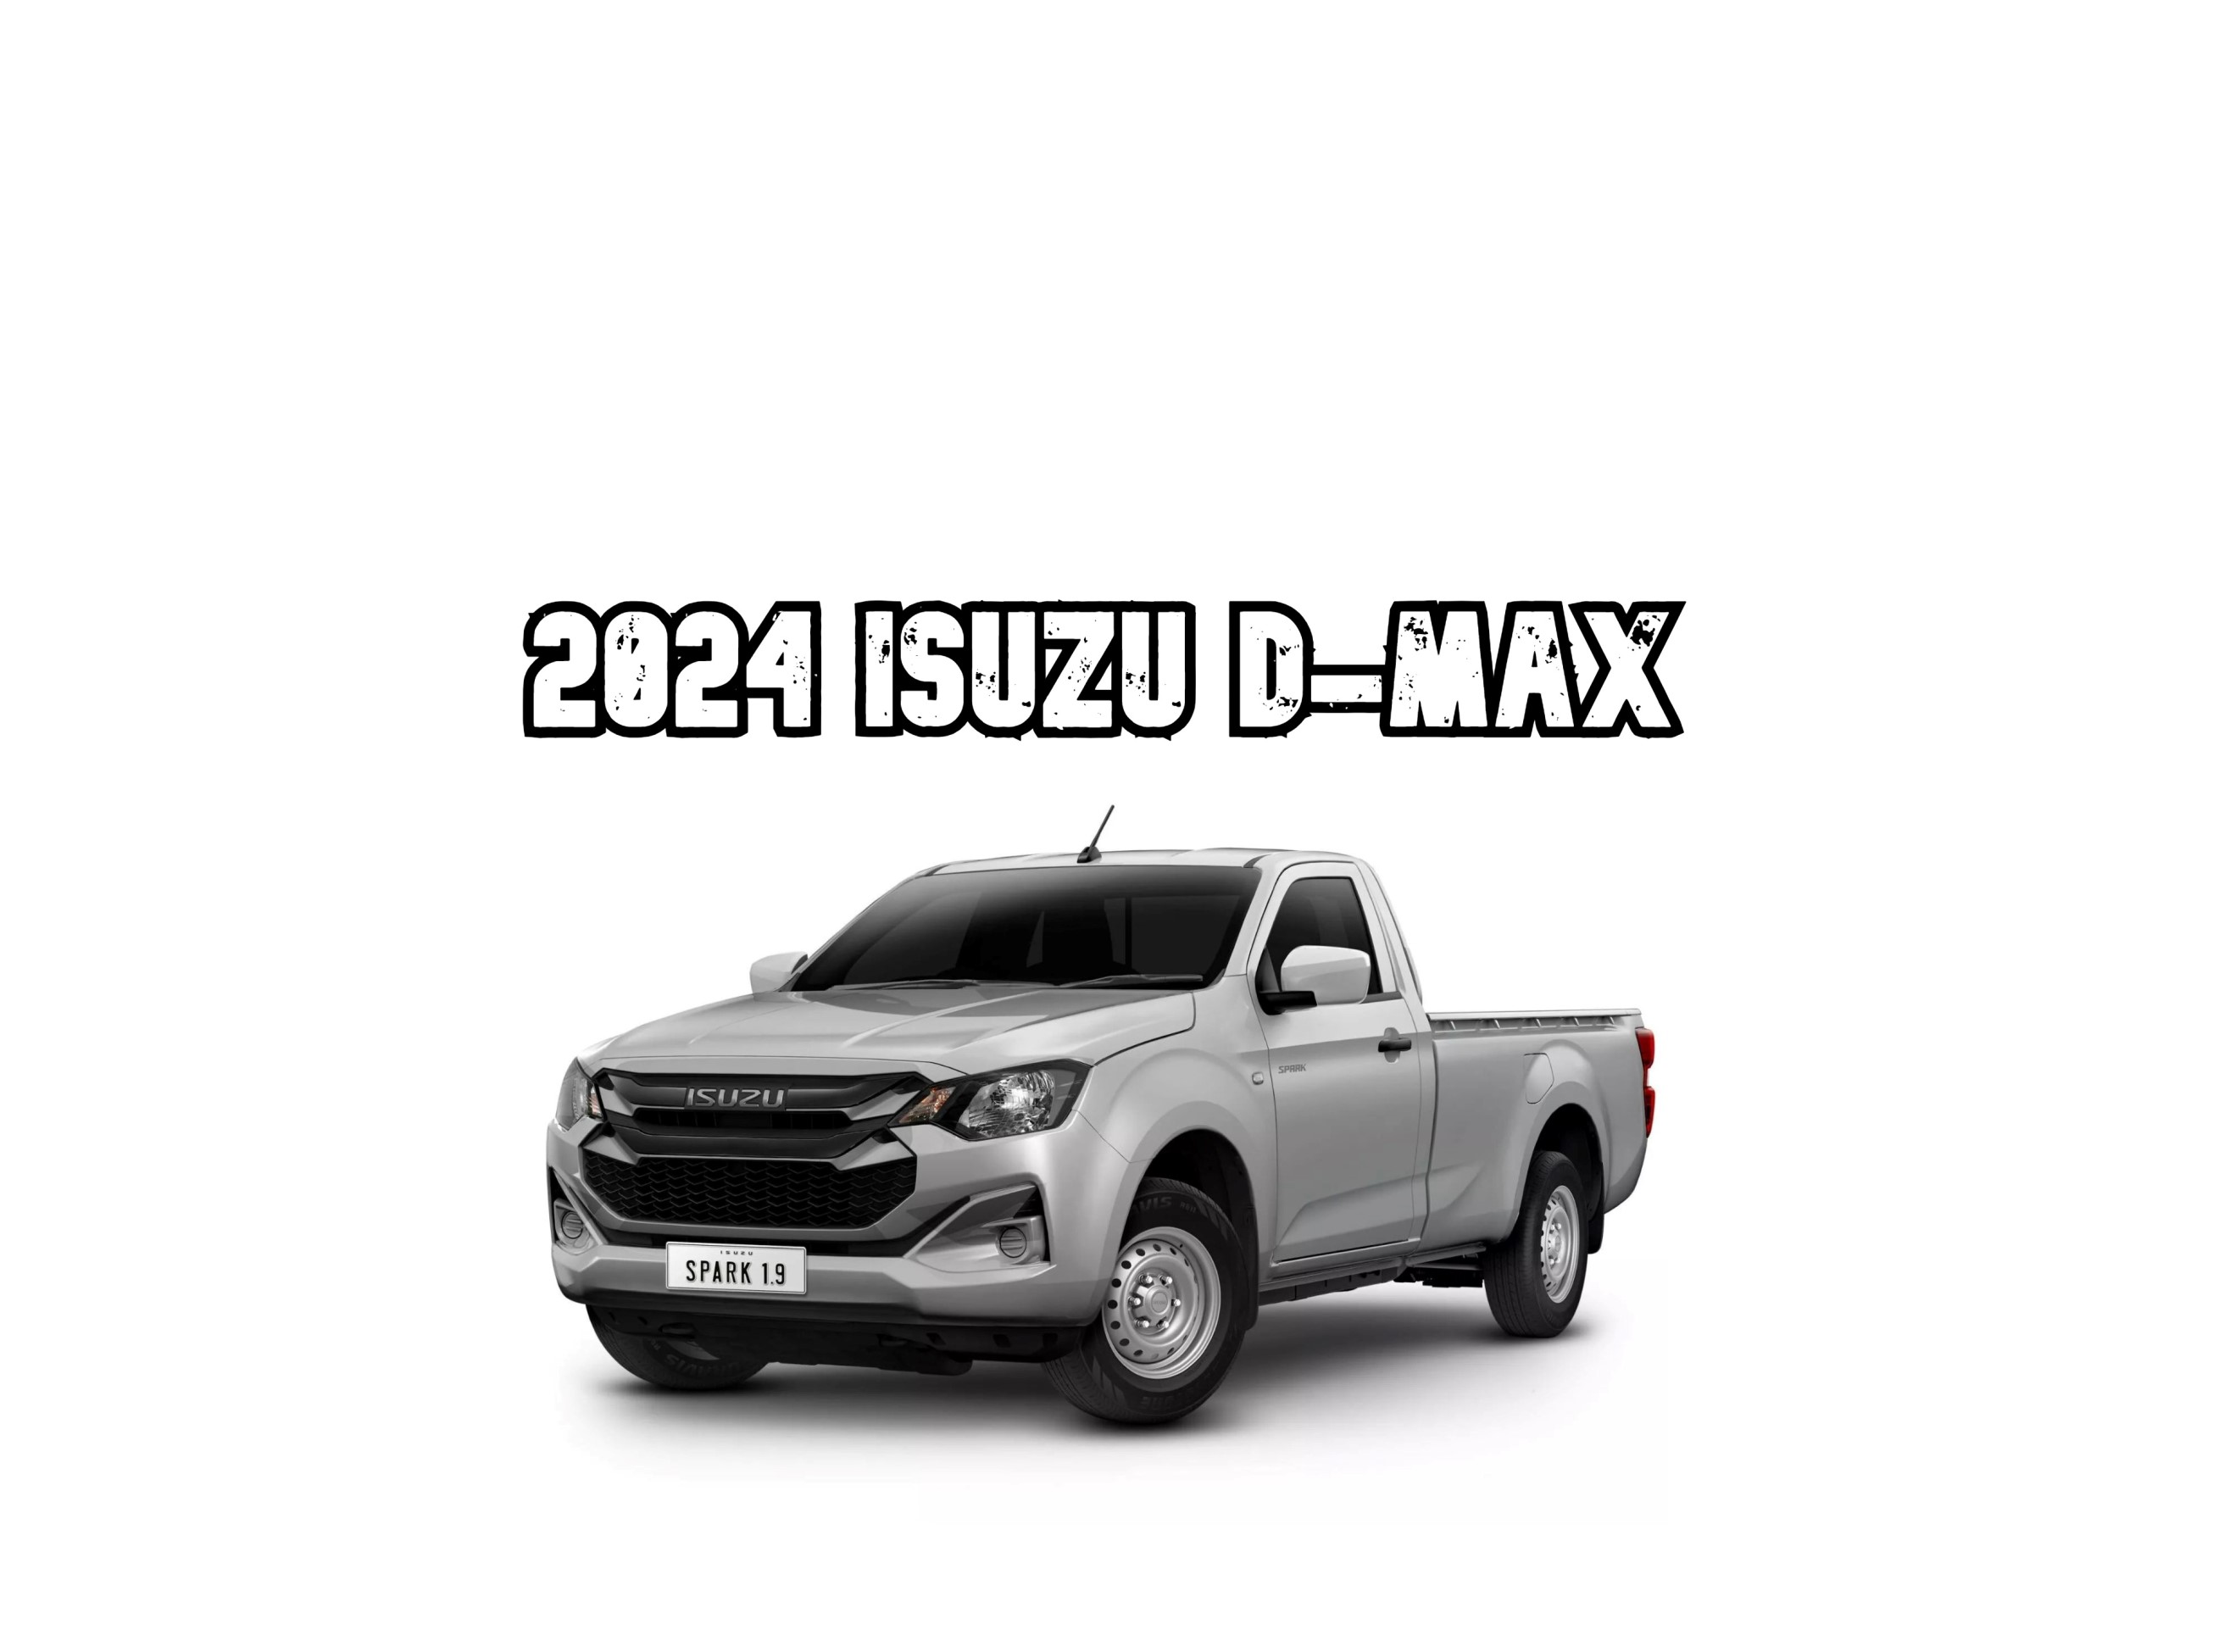 Isuzu D-Max Pickup Truck Gets Mid-Cycle Refresh With Improved 4x4 Driving  Performance - autoevolution